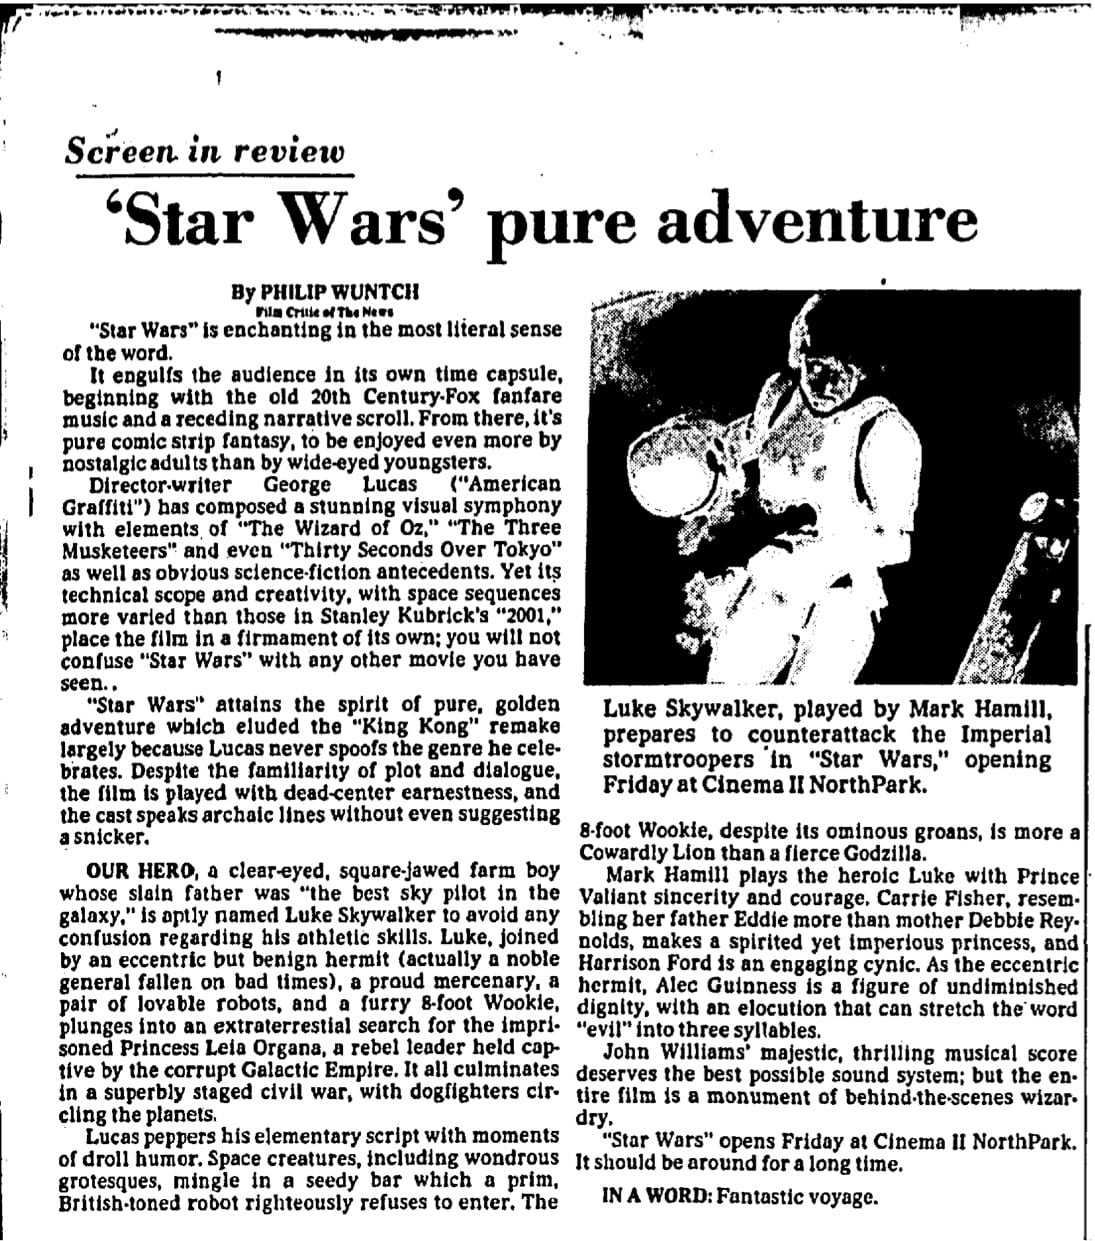 Headline: 'Star Wars' Pure Adventure by Philip Wuntch. Dallas Morning News (Dallas, Texas), May 26, 1977, p. 51. From the Dallas Morning News Historical Archive.